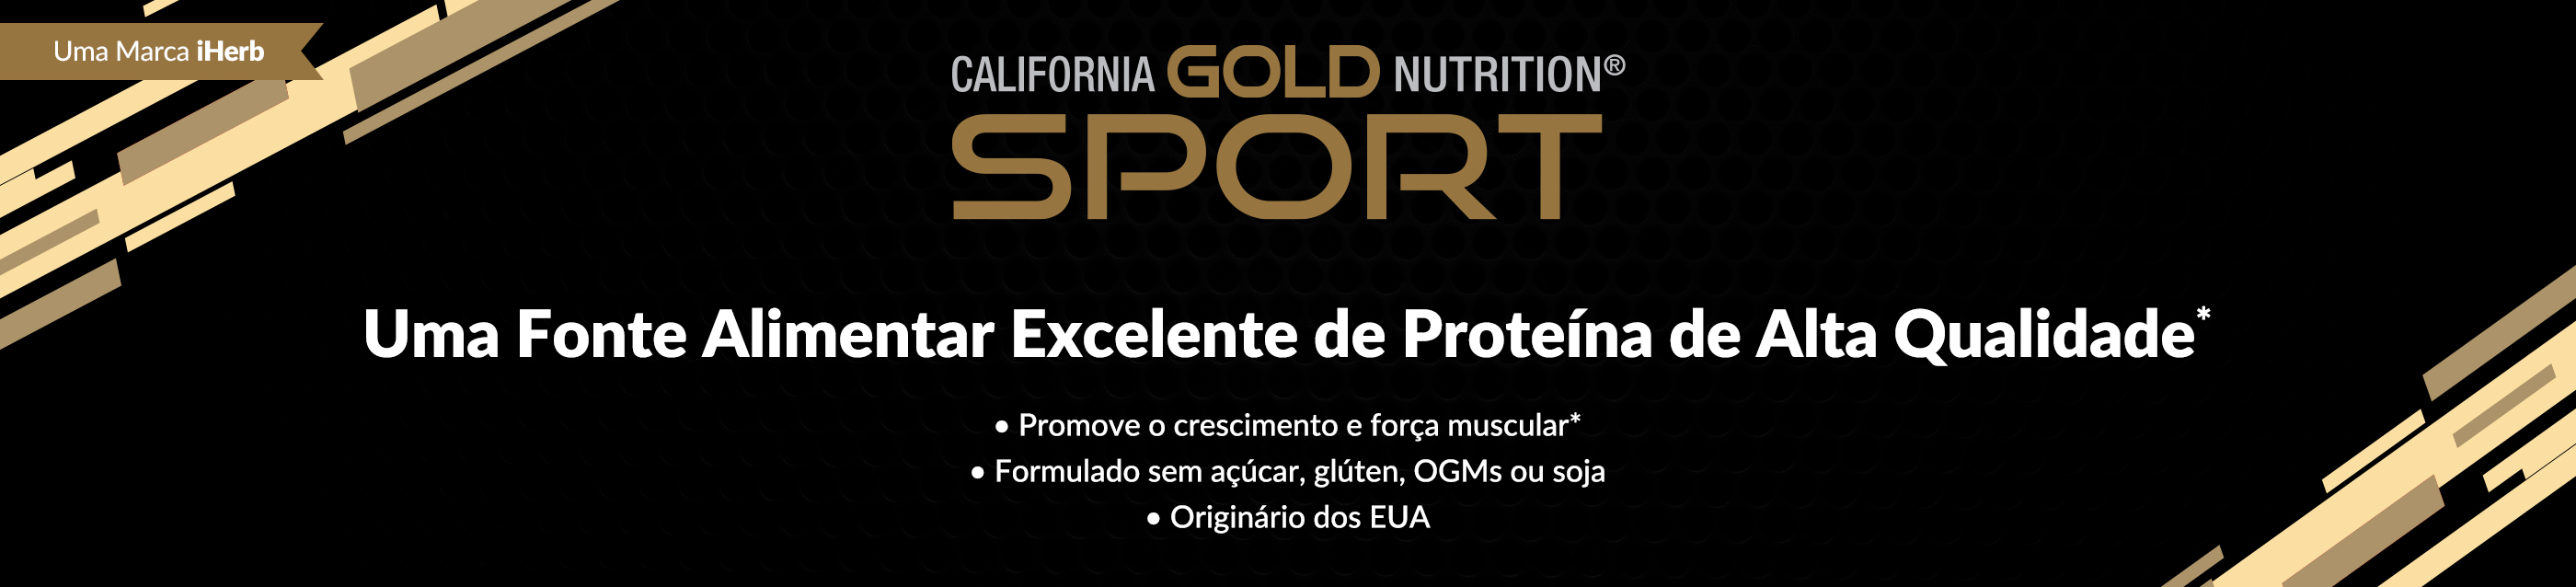 CGN Protein